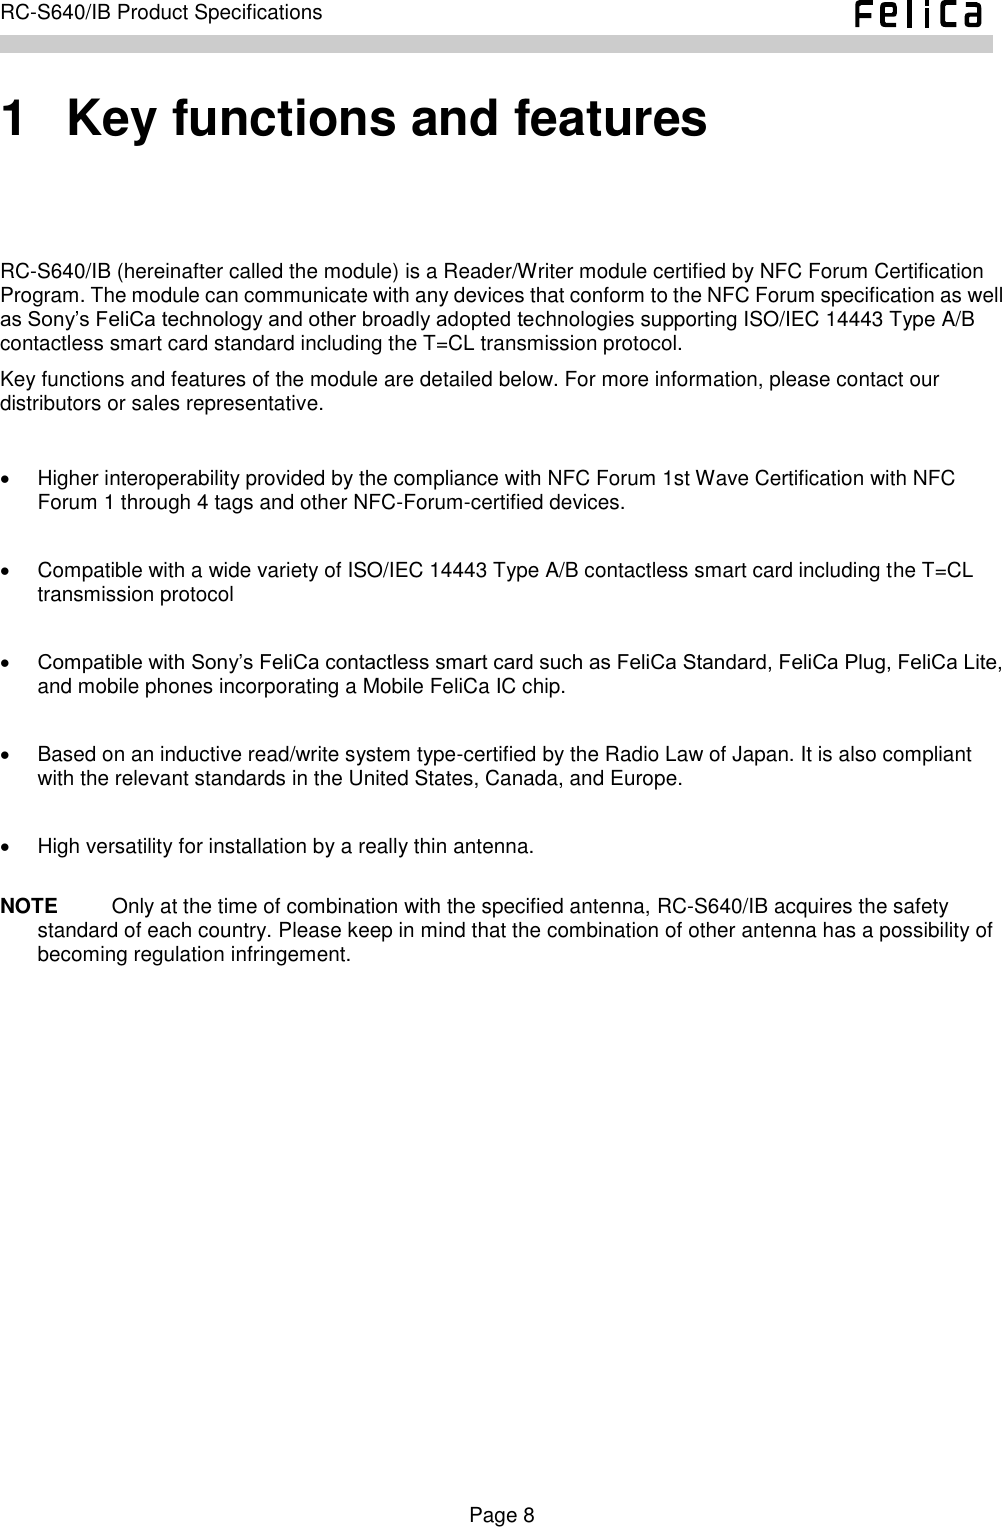    Page 8     RC-S640/IB Product Specifications    1   Key functions and features RC-S640/IB (hereinafter called the module) is a Reader/Writer module certified by NFC Forum Certification Program. The module can communicate with any devices that conform to the NFC Forum specification as well as Sony’s FeliCa technology and other broadly adopted technologies supporting ISO/IEC 14443 Type A/B contactless smart card standard including the T=CL transmission protocol. Key functions and features of the module are detailed below. For more information, please contact our distributors or sales representative.    Higher interoperability provided by the compliance with NFC Forum 1st Wave Certification with NFC Forum 1 through 4 tags and other NFC-Forum-certified devices.    Compatible with a wide variety of ISO/IEC 14443 Type A/B contactless smart card including the T=CL transmission protocol     Compatible with Sony’s FeliCa contactless smart card such as FeliCa Standard, FeliCa Plug, FeliCa Lite, and mobile phones incorporating a Mobile FeliCa IC chip.      Based on an inductive read/write system type-certified by the Radio Law of Japan. It is also compliant with the relevant standards in the United States, Canada, and Europe.    High versatility for installation by a really thin antenna.  NOTE    Only at the time of combination with the specified antenna, RC-S640/IB acquires the safety standard of each country. Please keep in mind that the combination of other antenna has a possibility of becoming regulation infringement.  